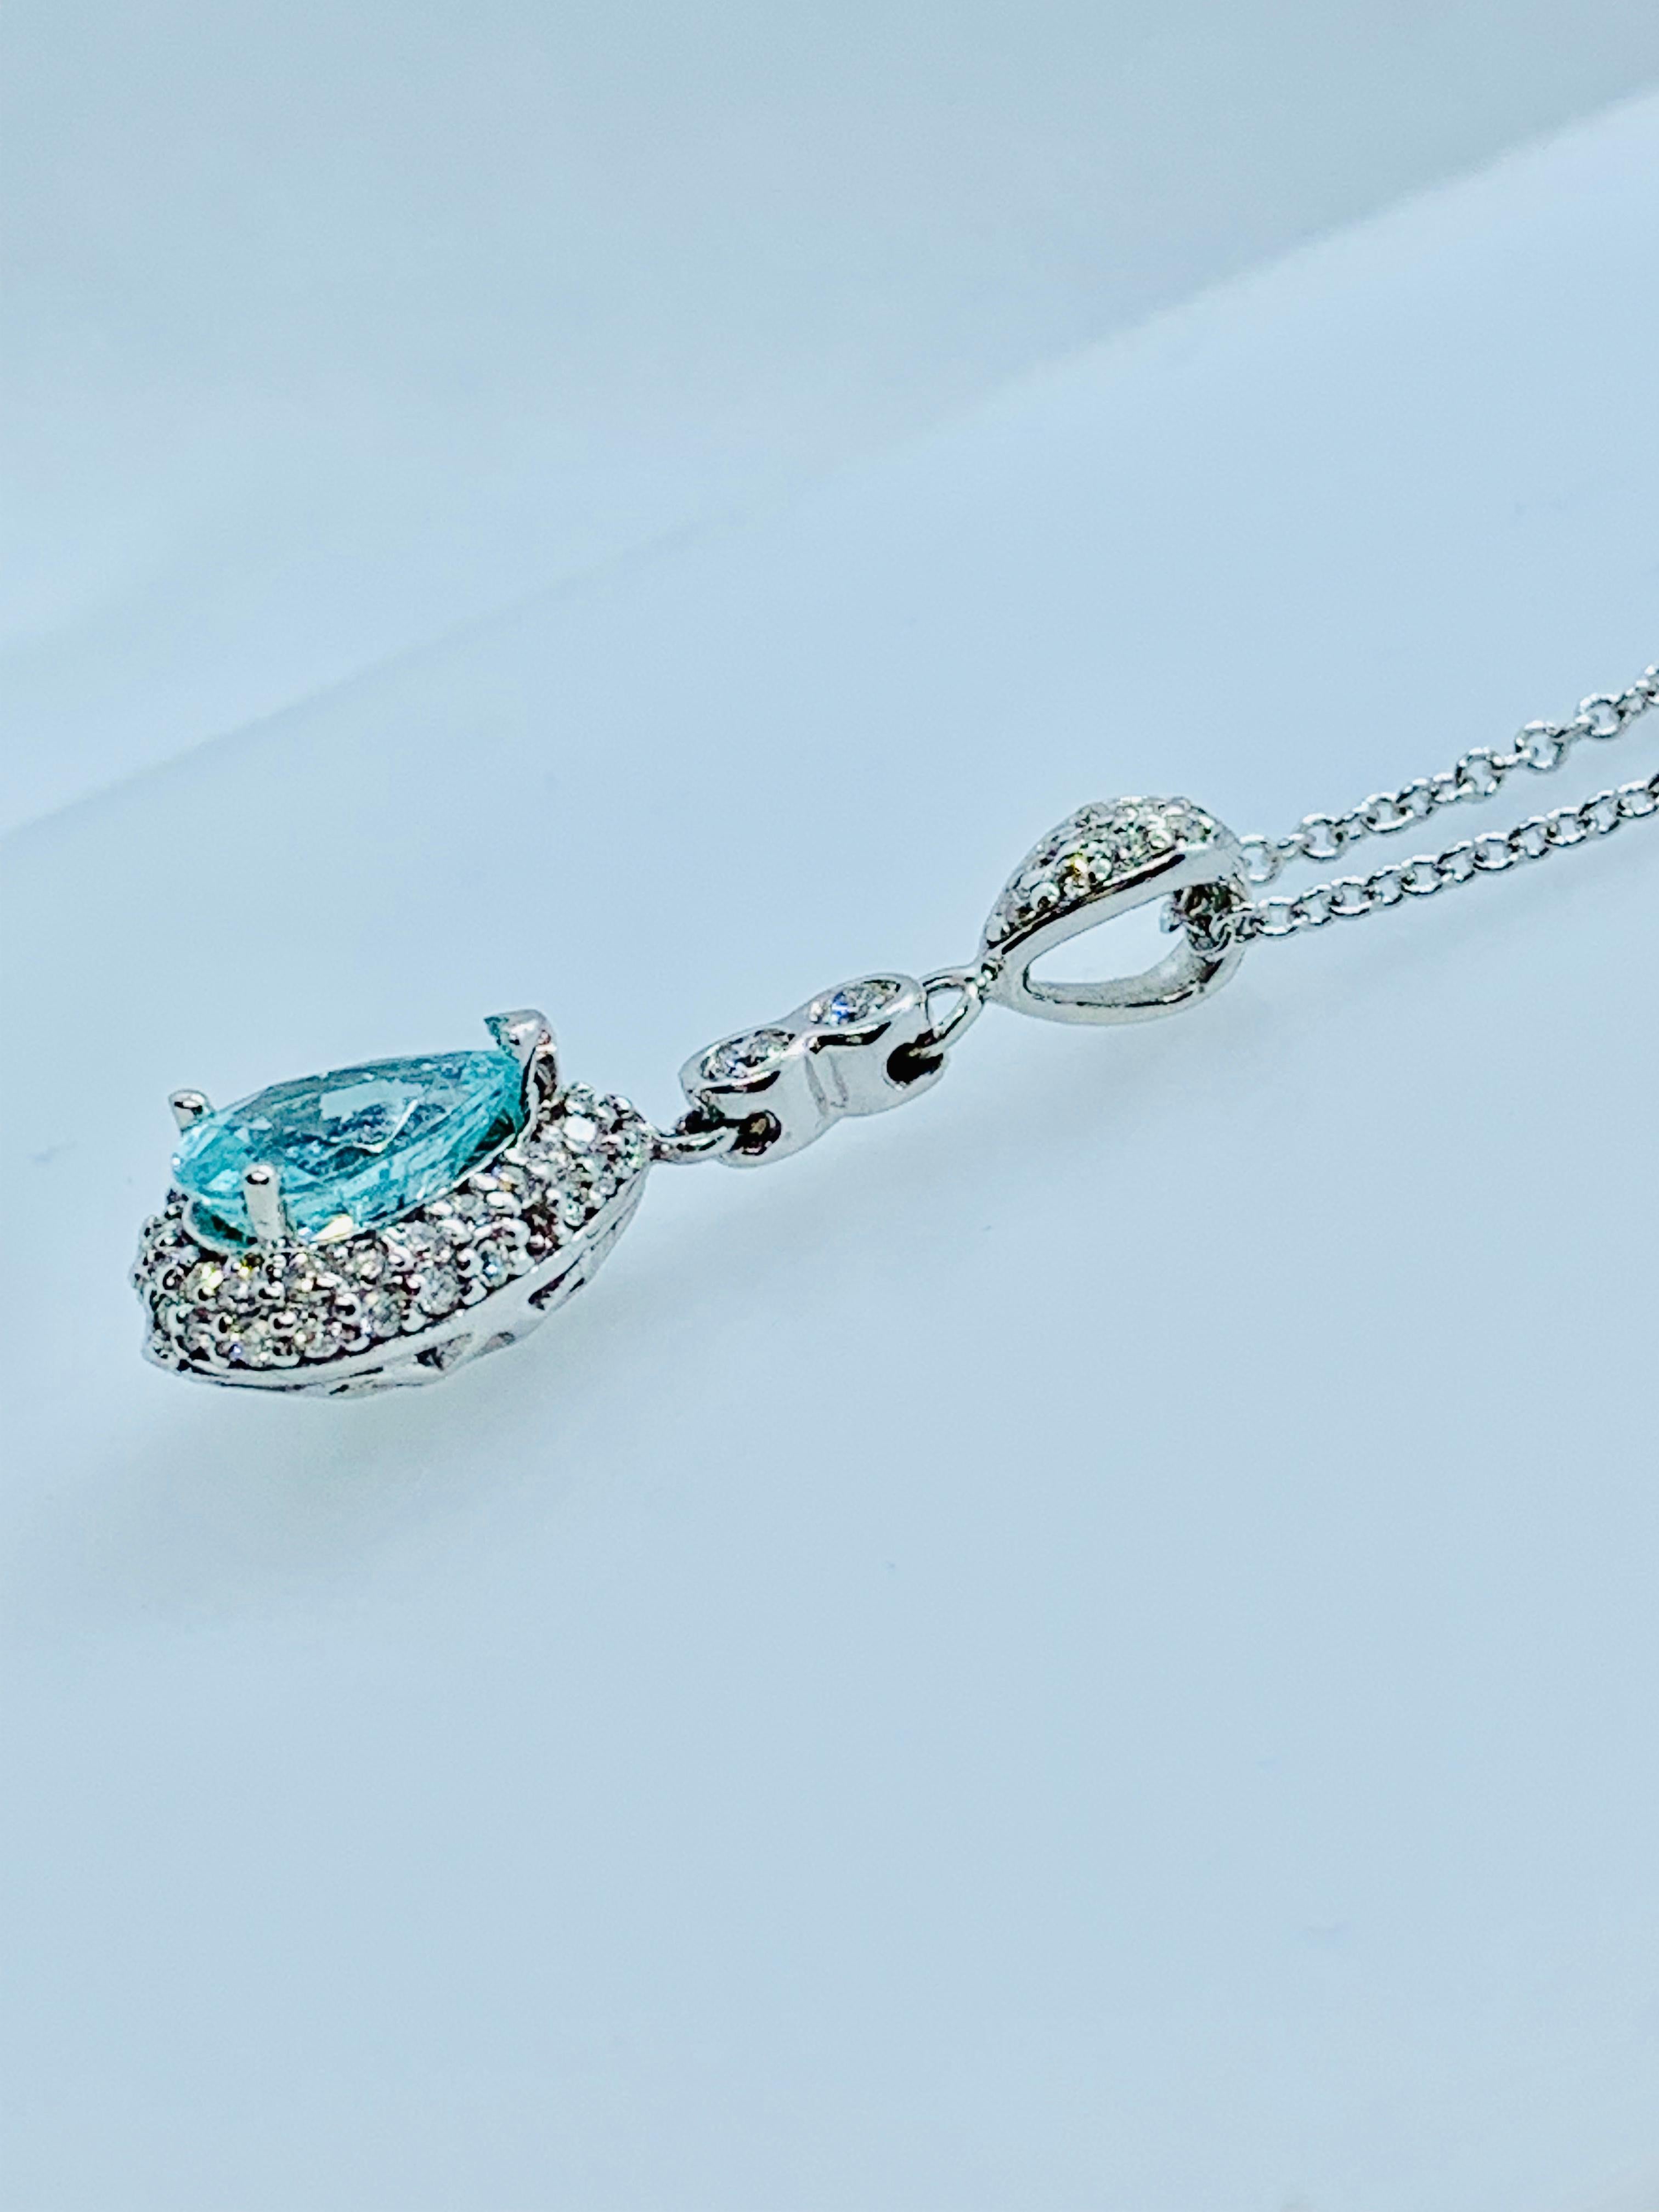 This is a stunning pendant necklace! The Drop pendant is in 18K White Gold and features a gorgeous, pear shaped, 1.26 carat Paraiba Tourmaline. The color of the tourmaline is an intense greenish blue. The pendant also features 53 round, white